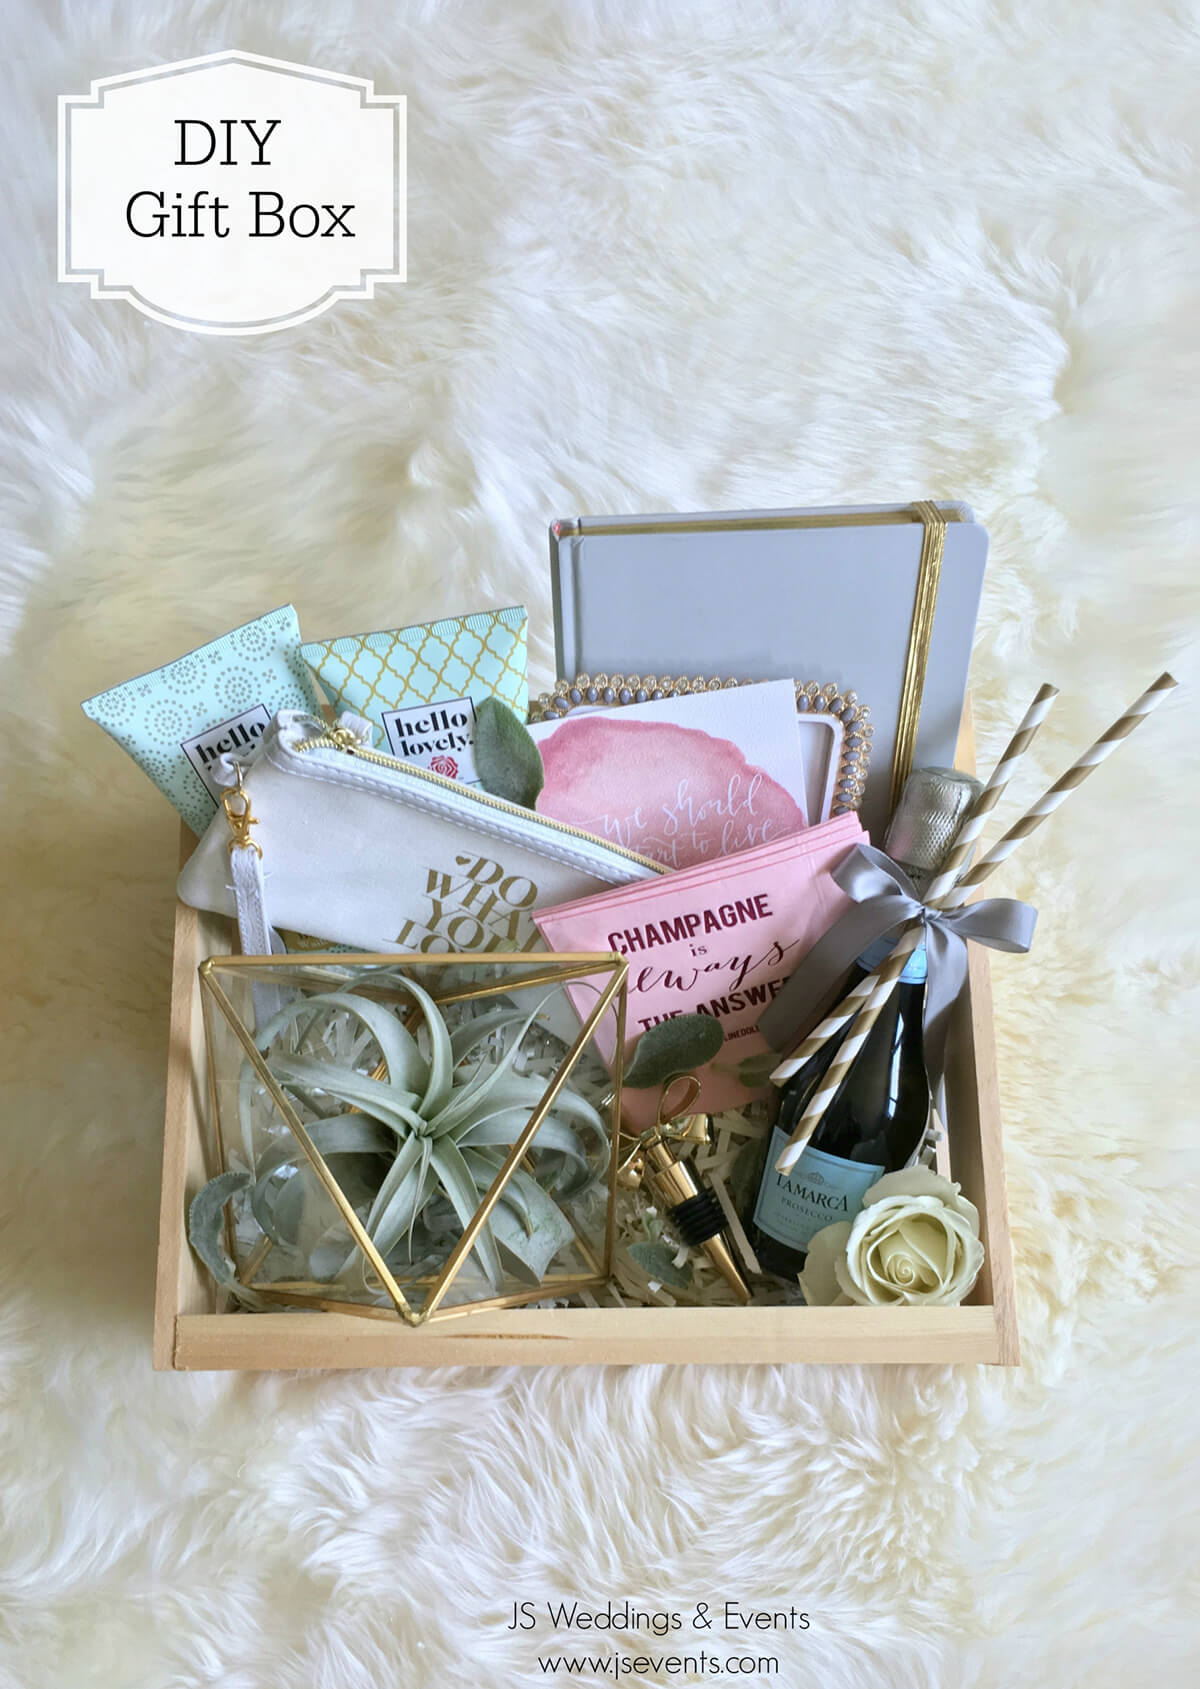 Styling Tips for a Customized Gift Box